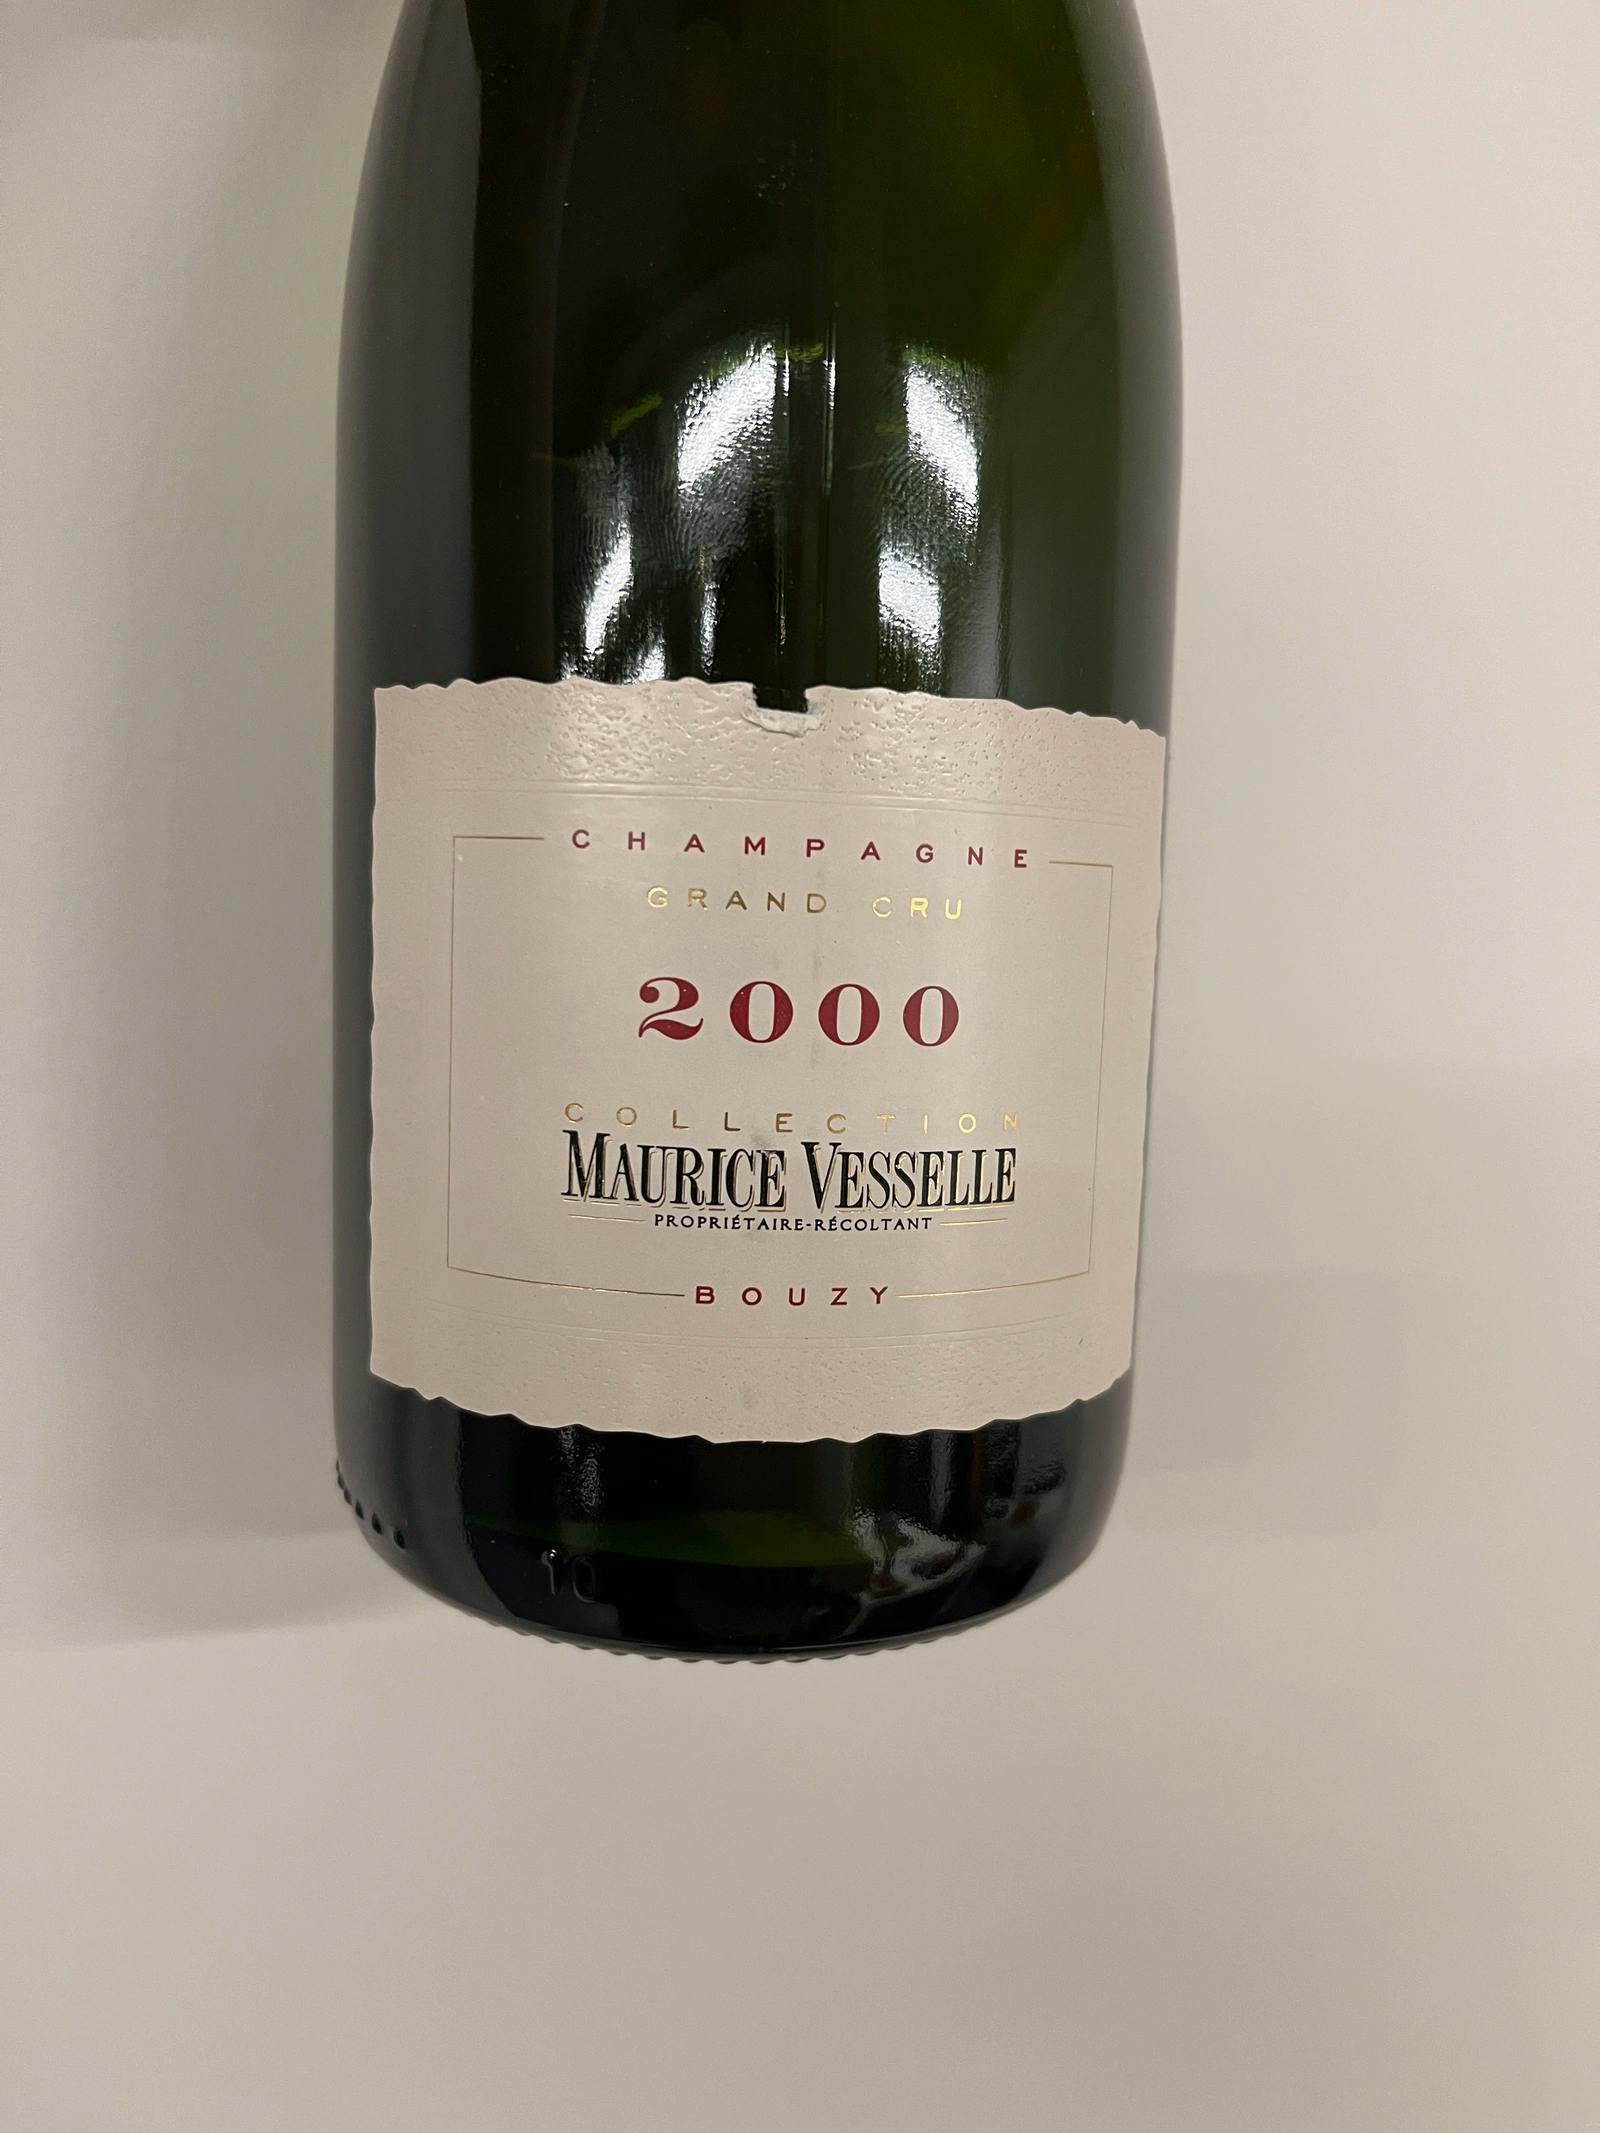 Maurice Vesselle Grand Cru Collection Bouzy 2000